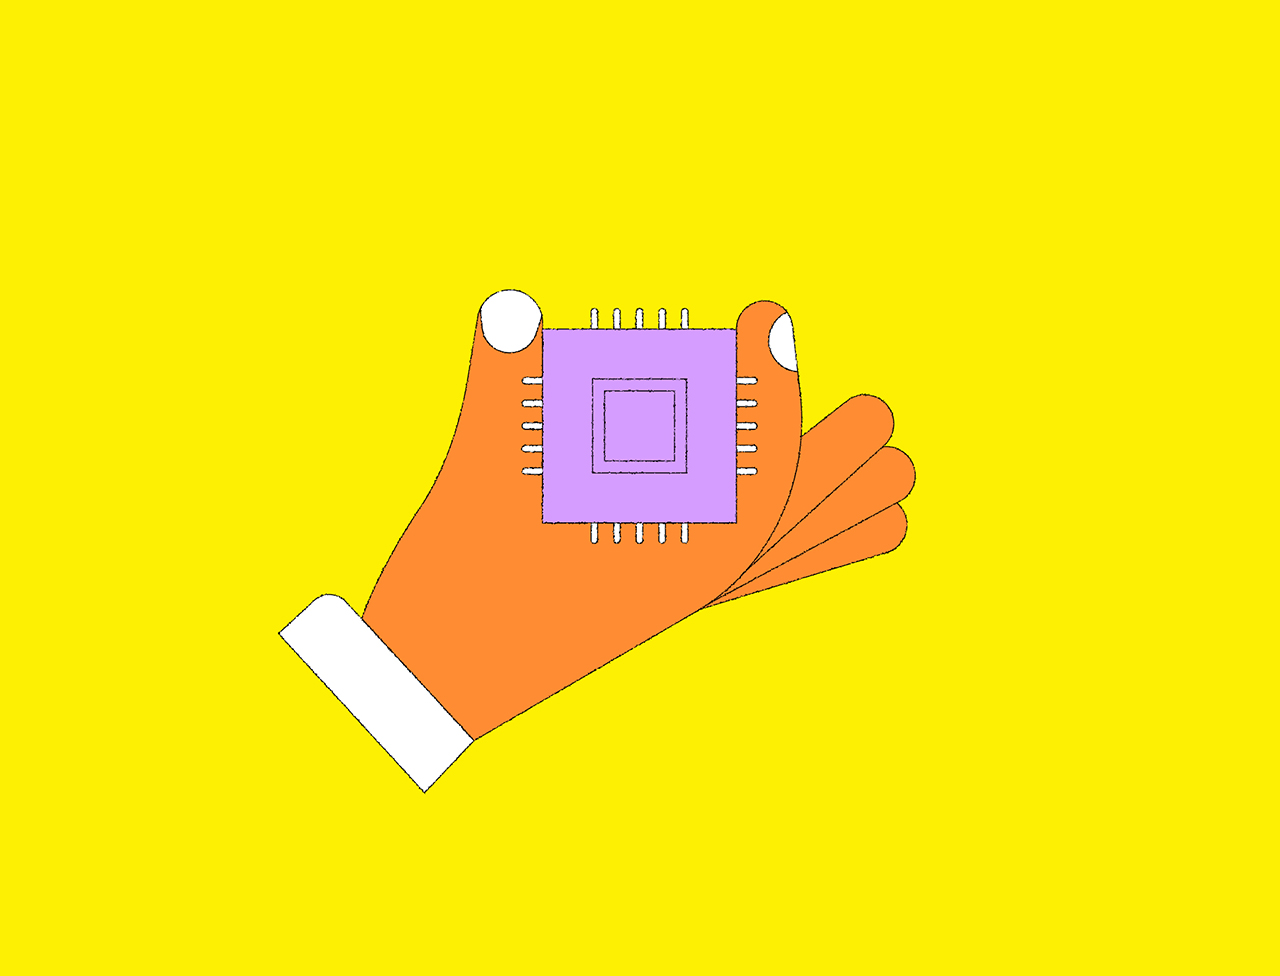 Illustration of a hand grasping a computer chip 